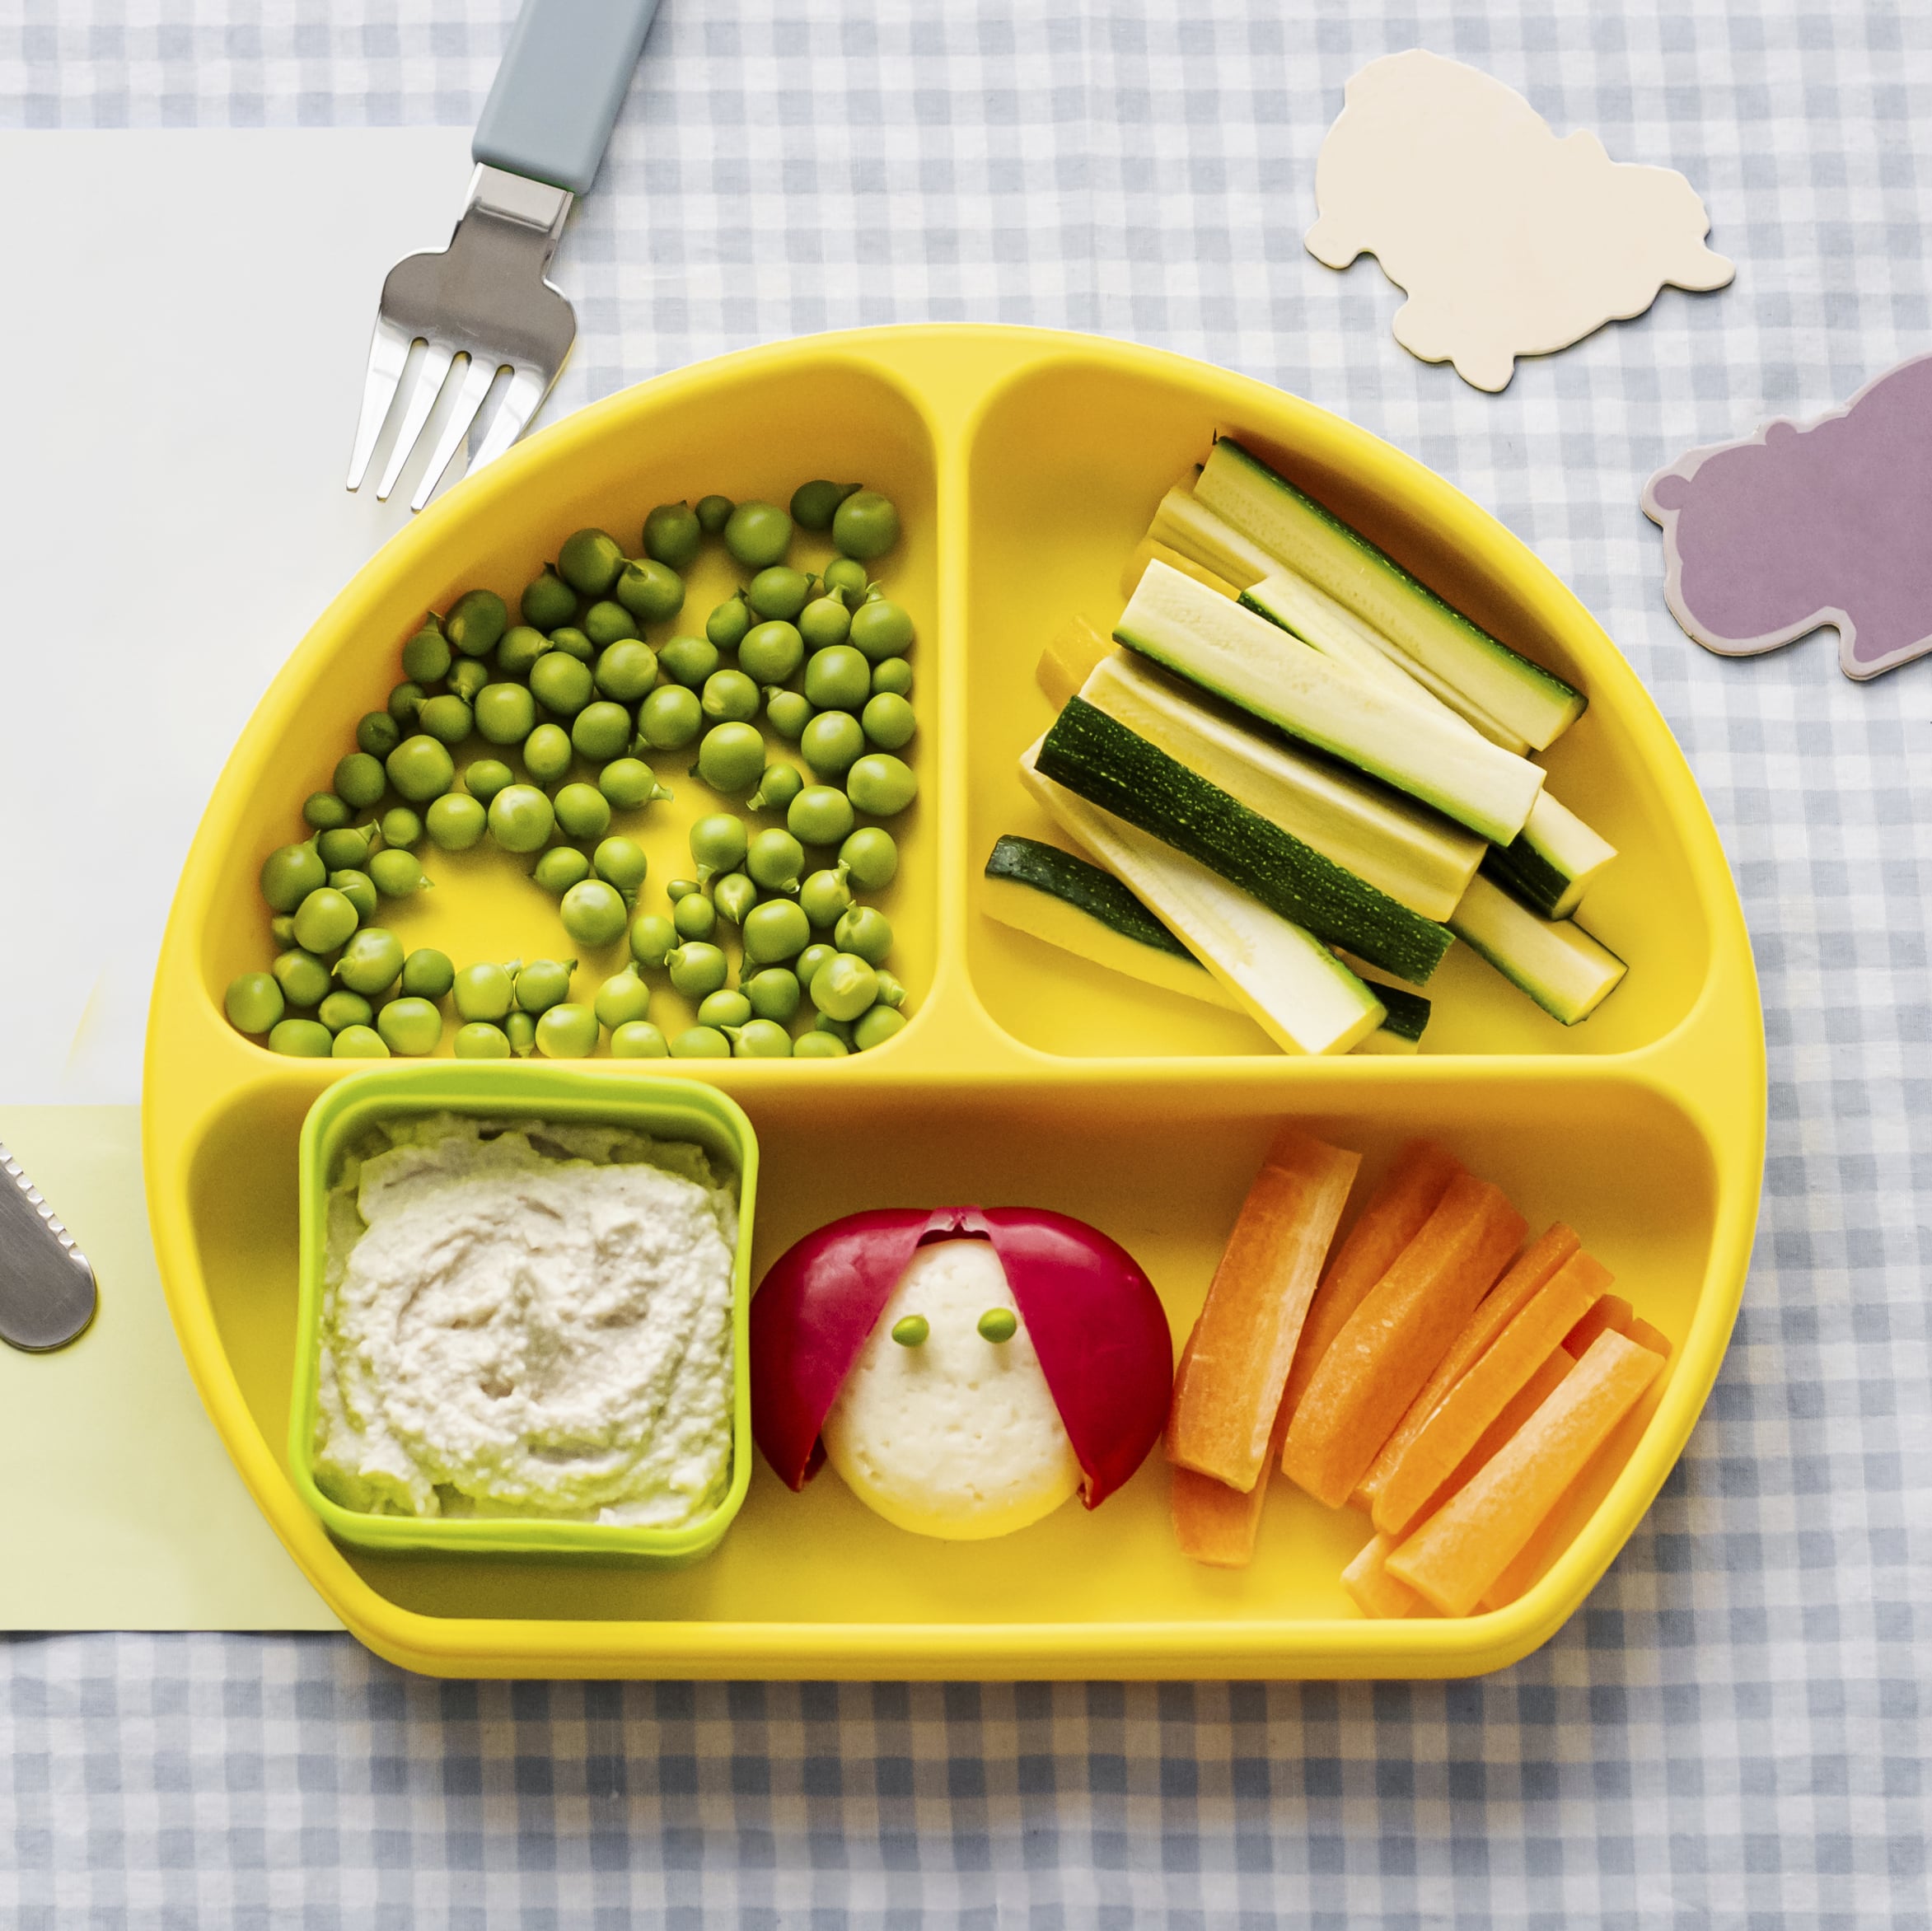 Food tray for weaning preparation